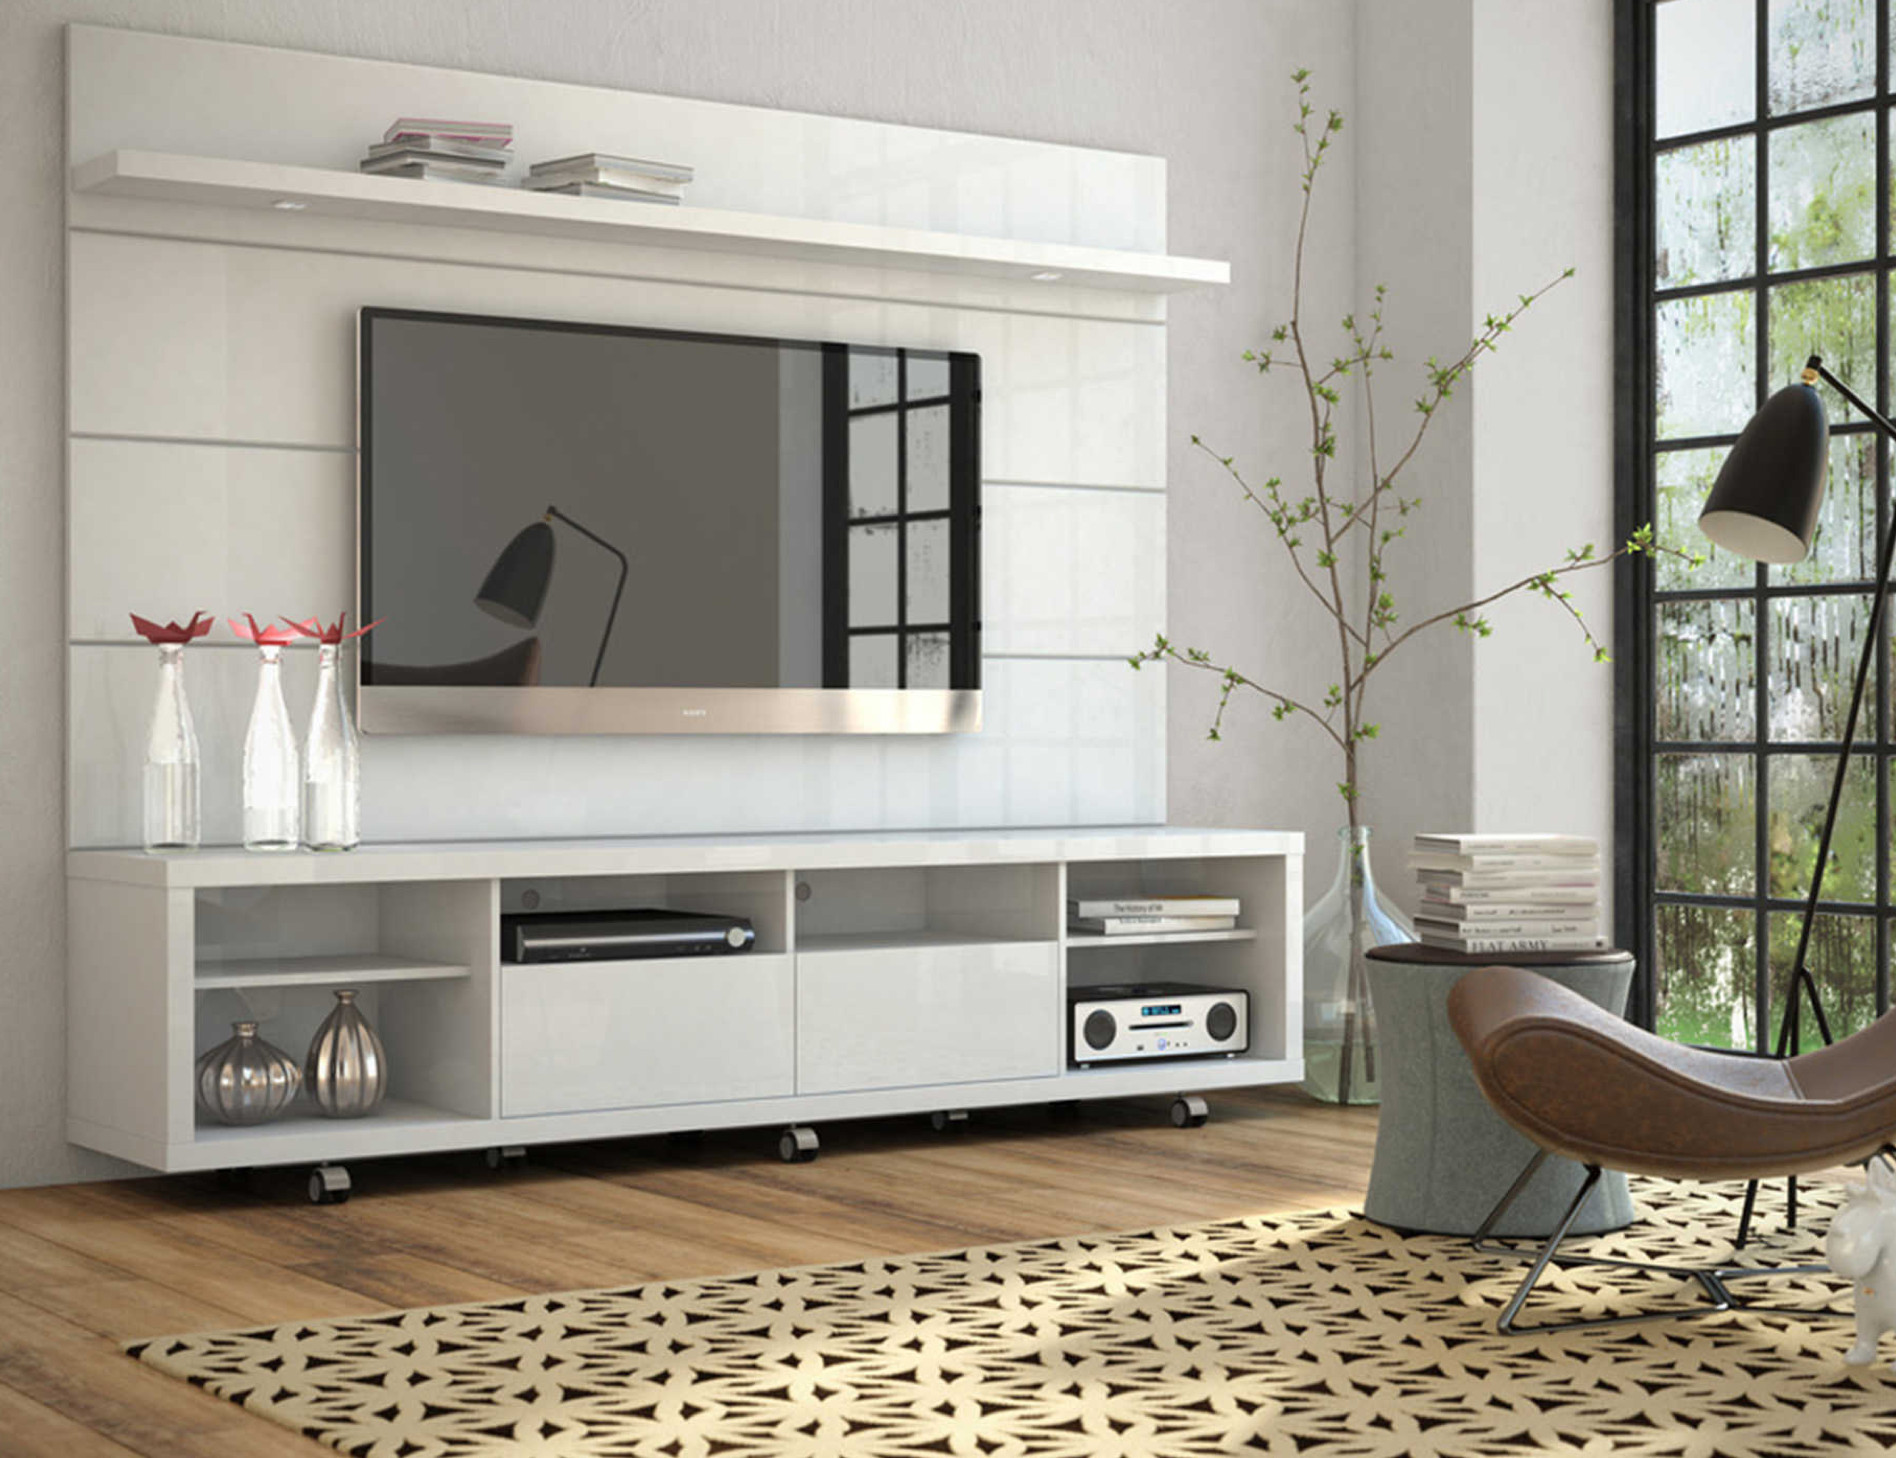 Buying Guide to TV Stands & Media Centers | Bed Bath & Beyond